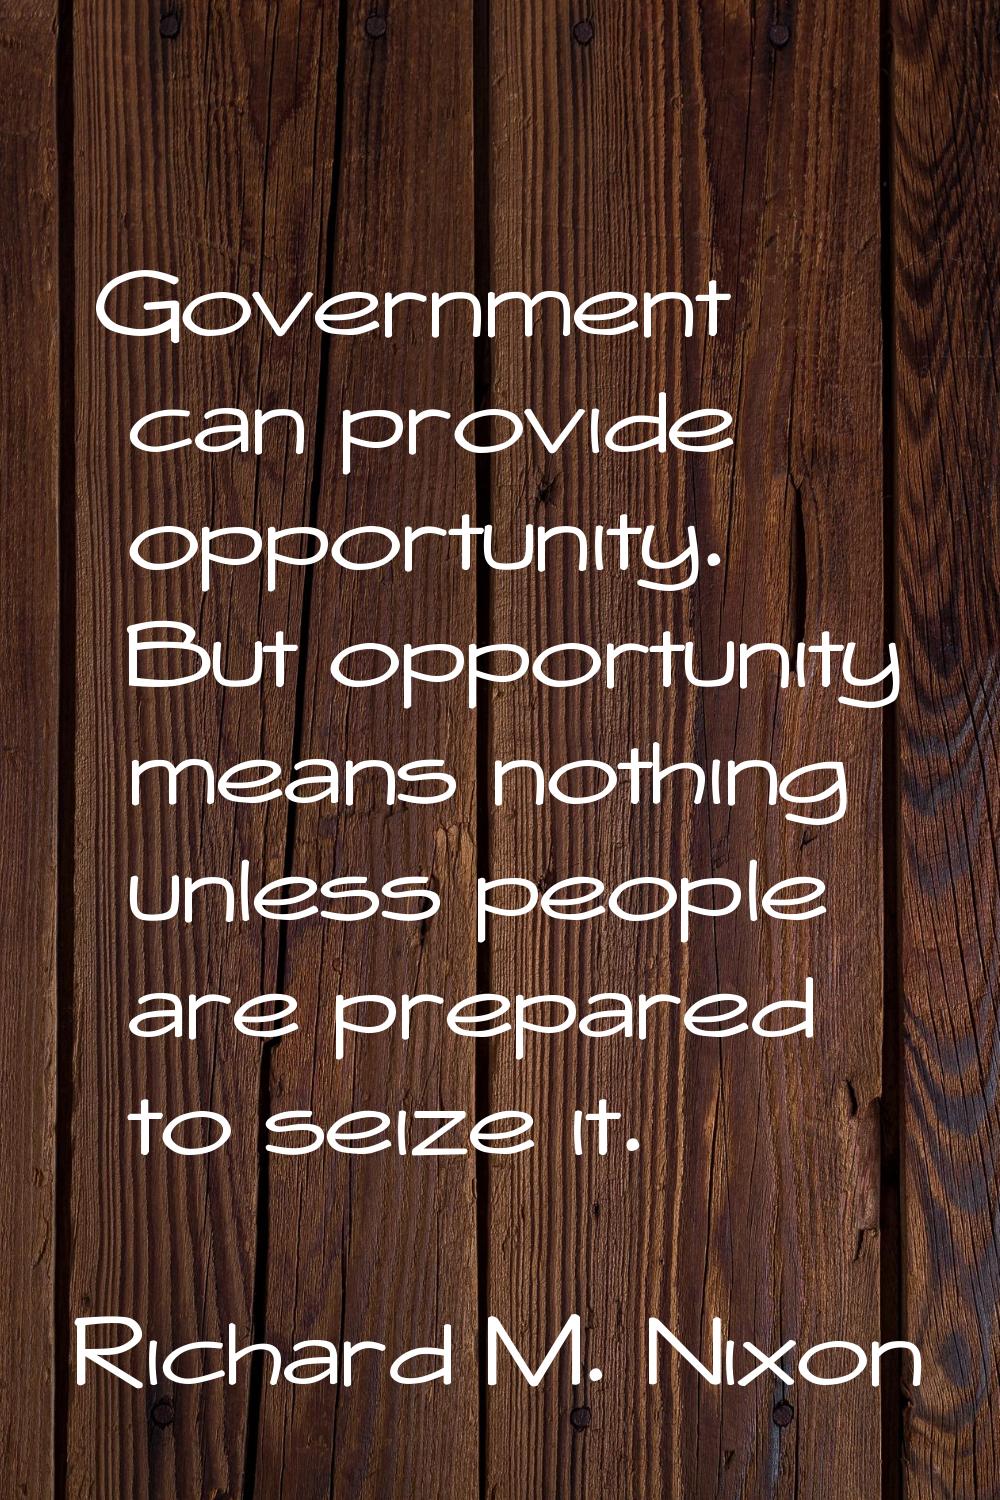 Government can provide opportunity. But opportunity means nothing unless people are prepared to sei